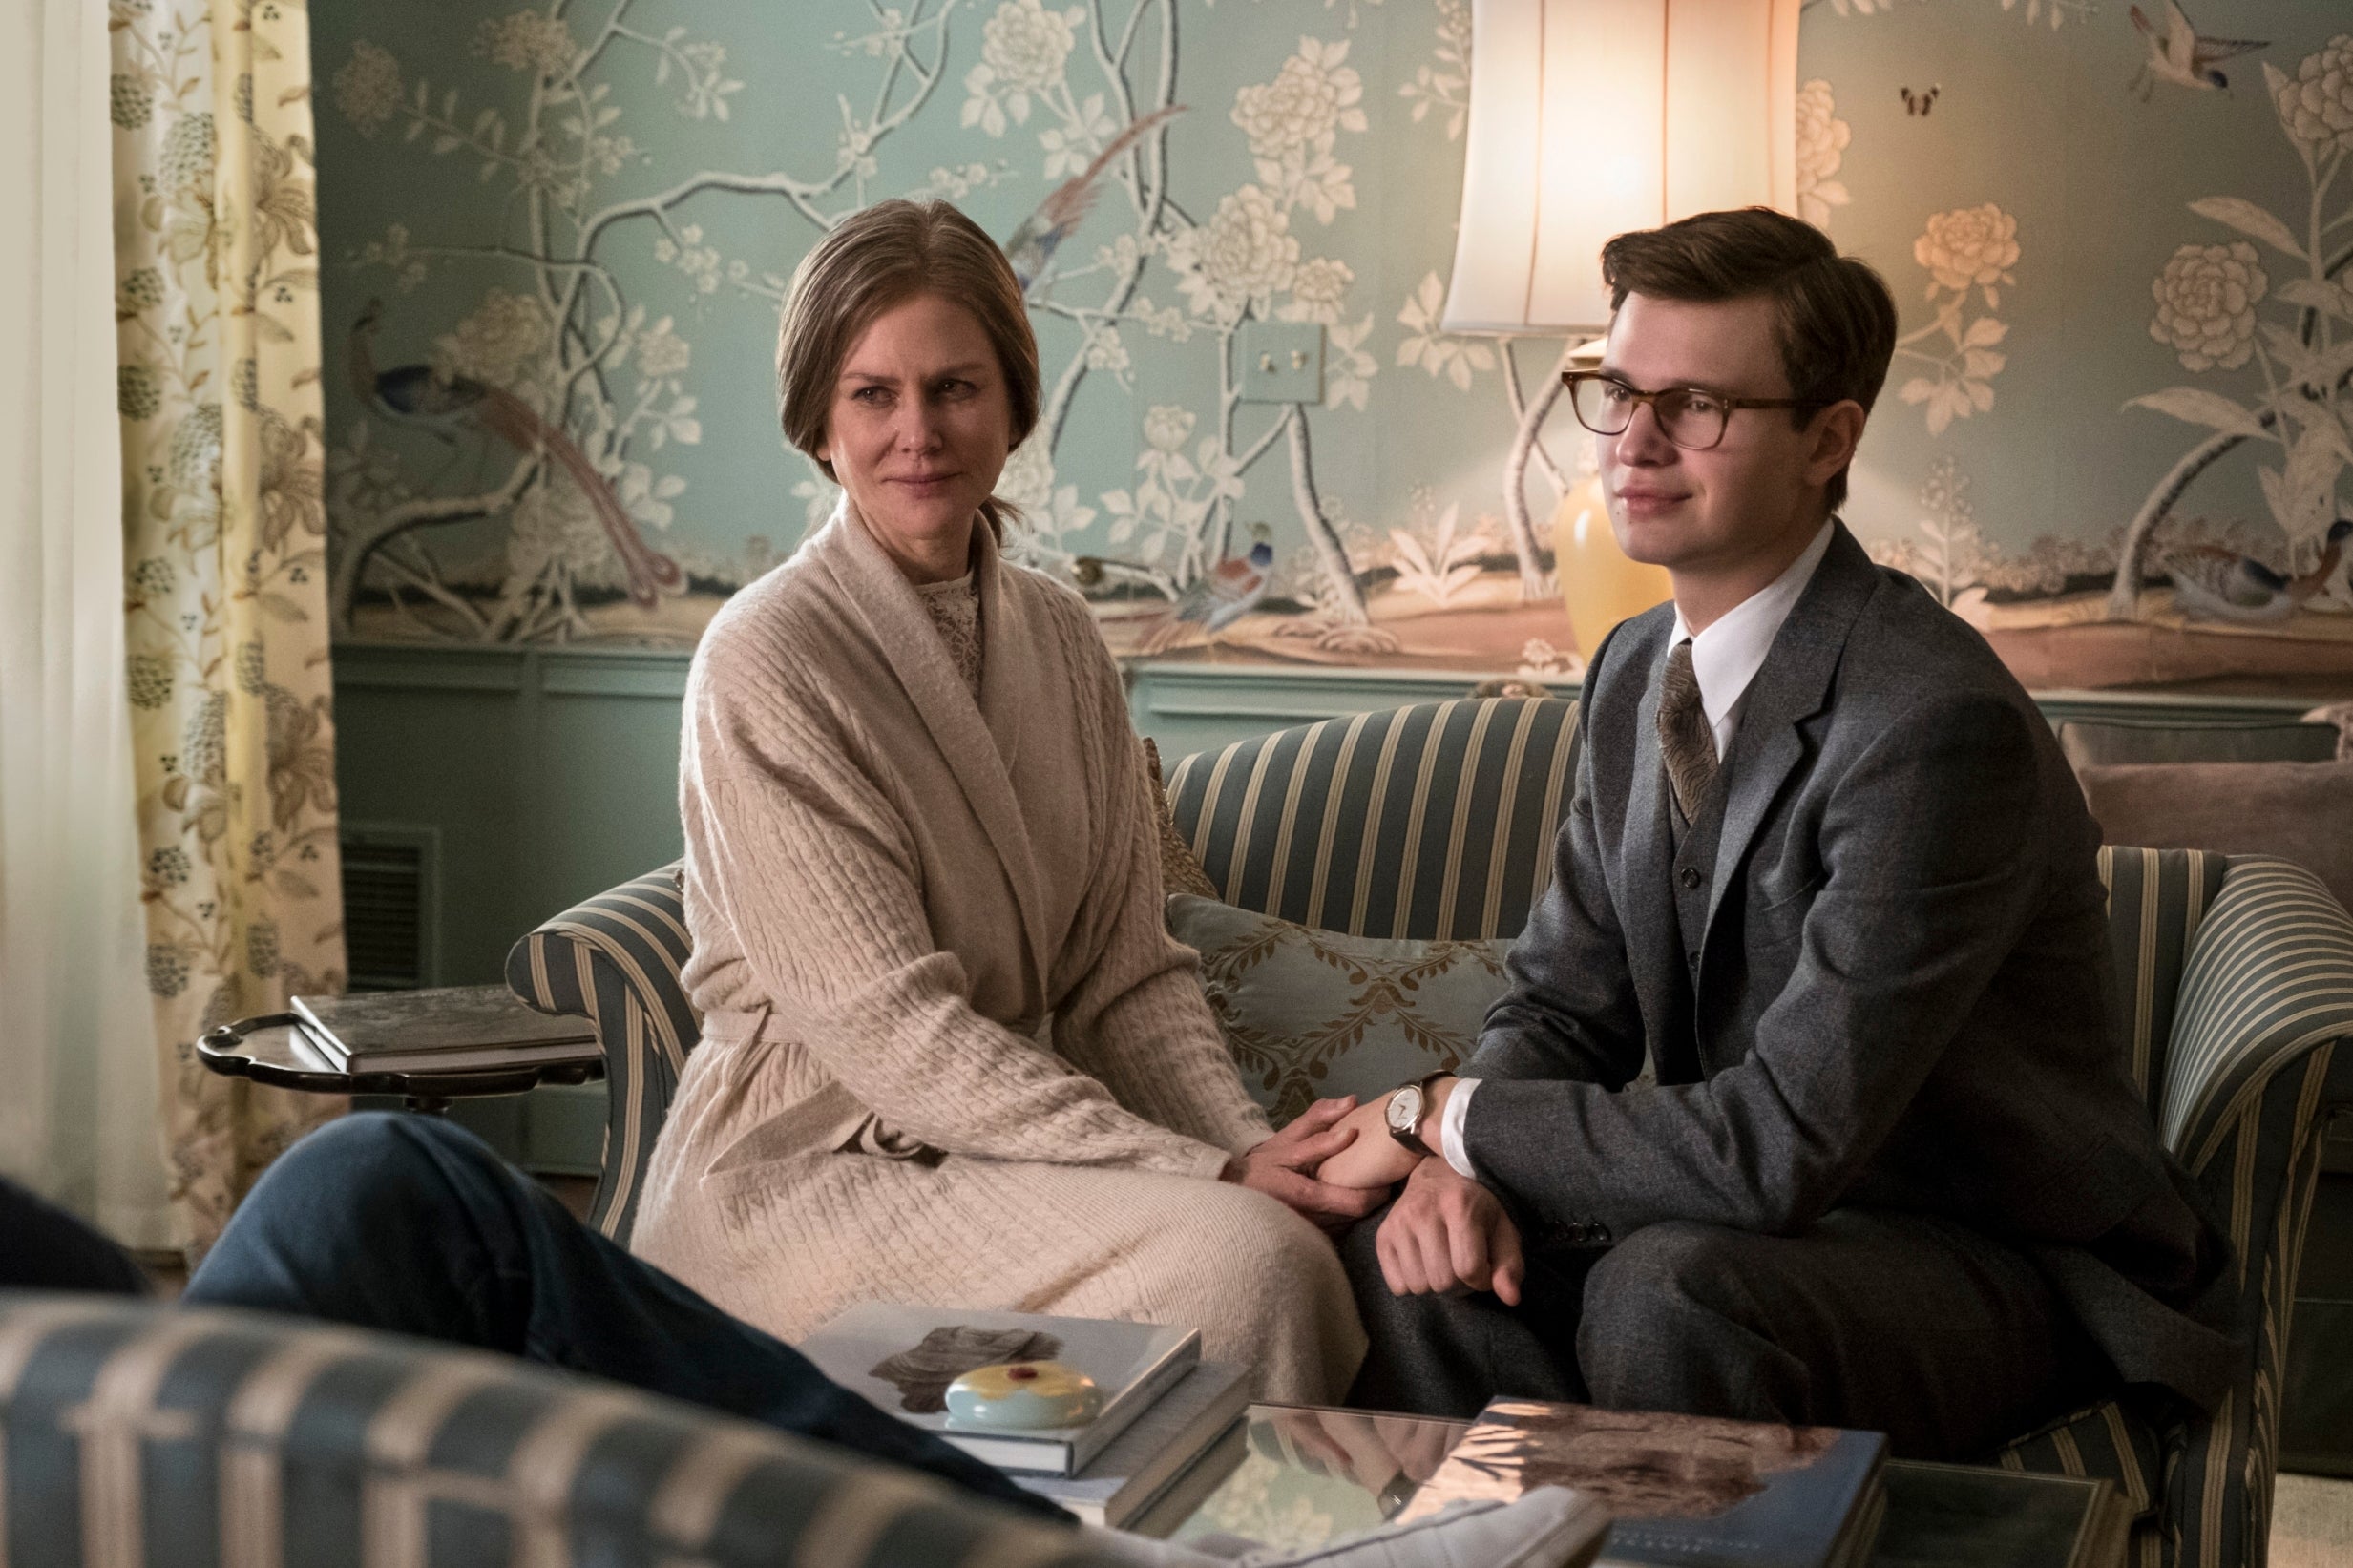 Nicole Kidman and Ansel Elgort in ‘The Goldfinch’